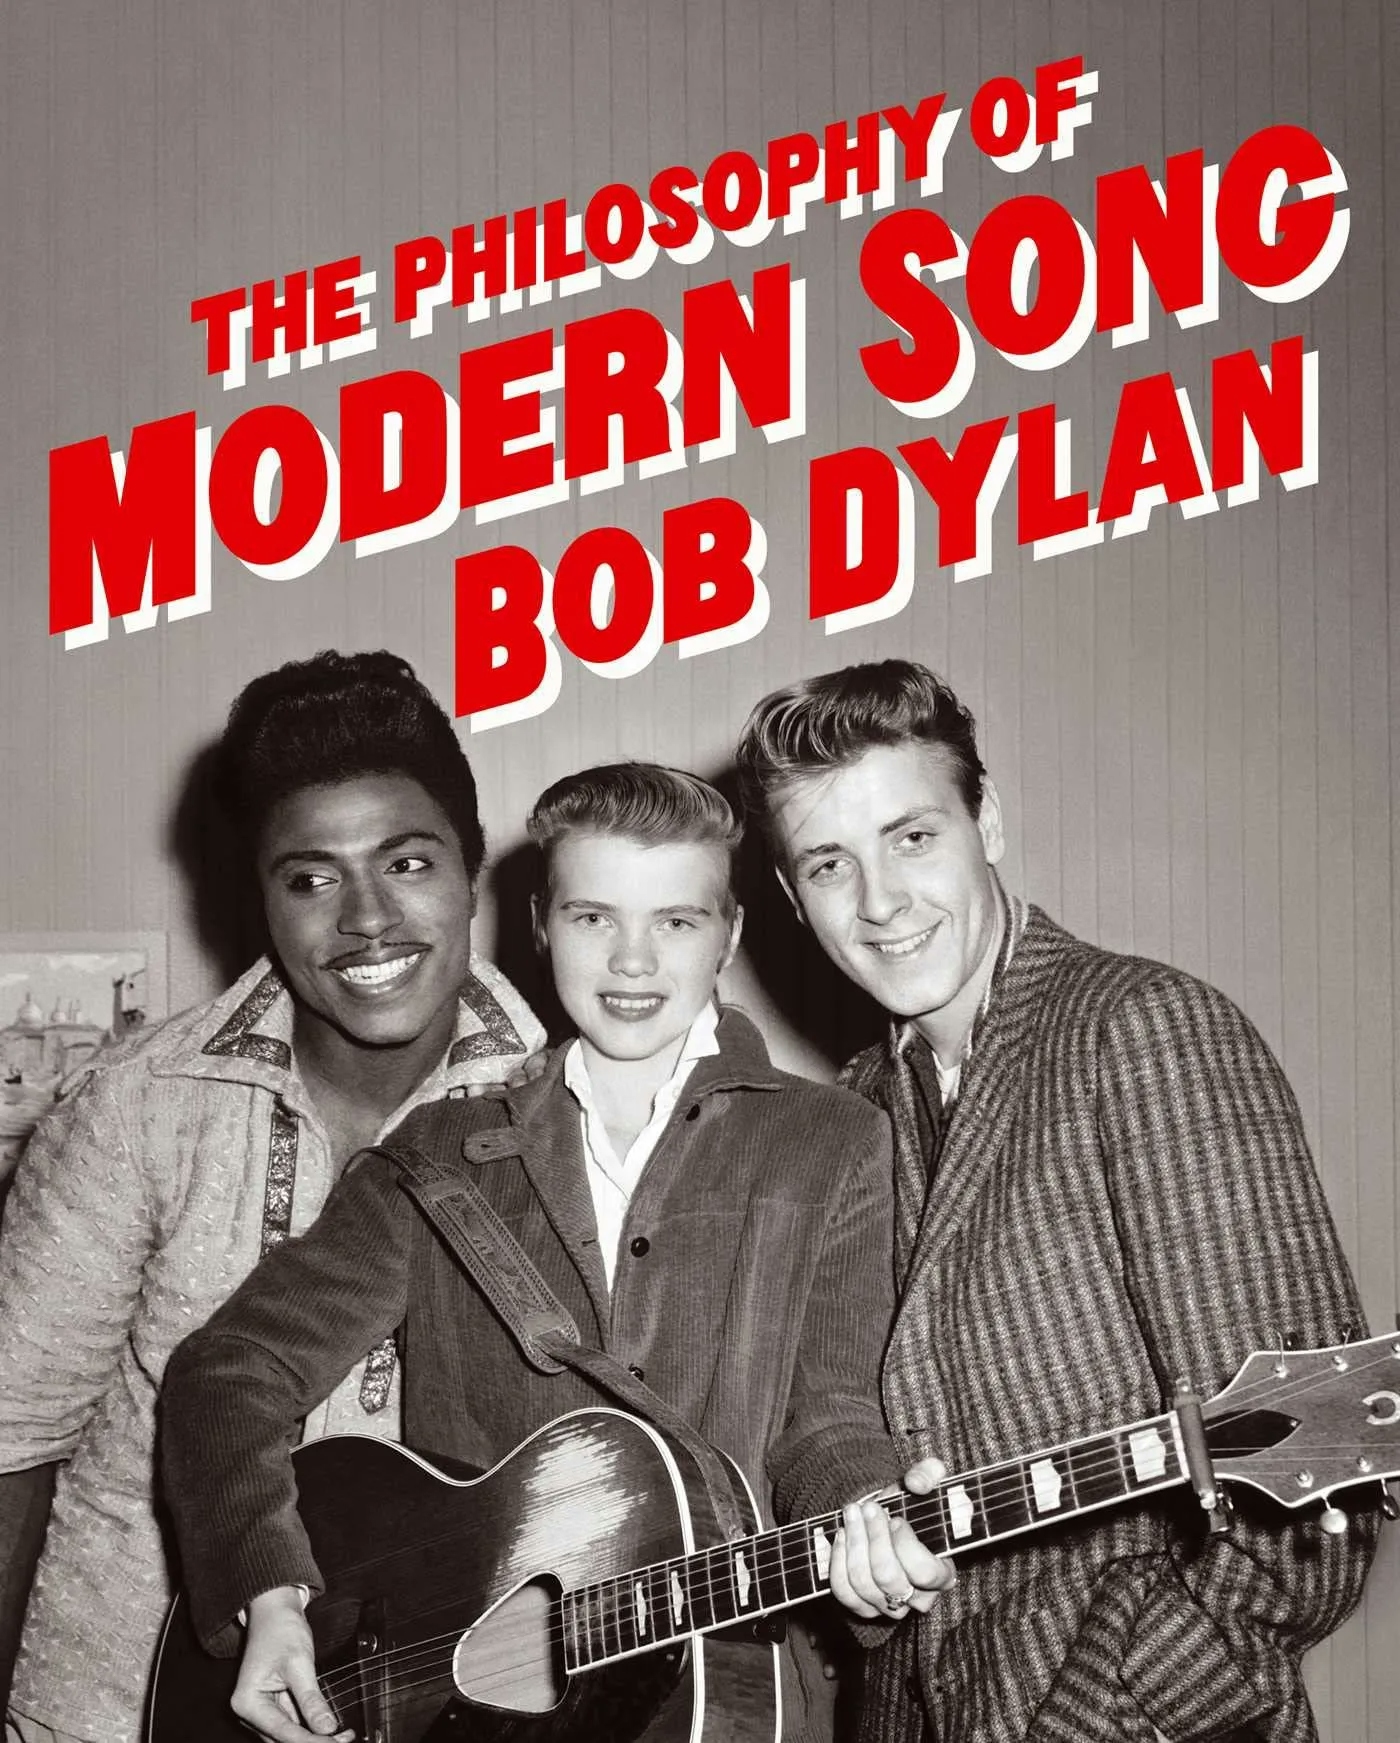 Album artwork for Album artwork for The Philosophy of Modern Song by Bob Dylan by The Philosophy of Modern Song - Bob Dylan